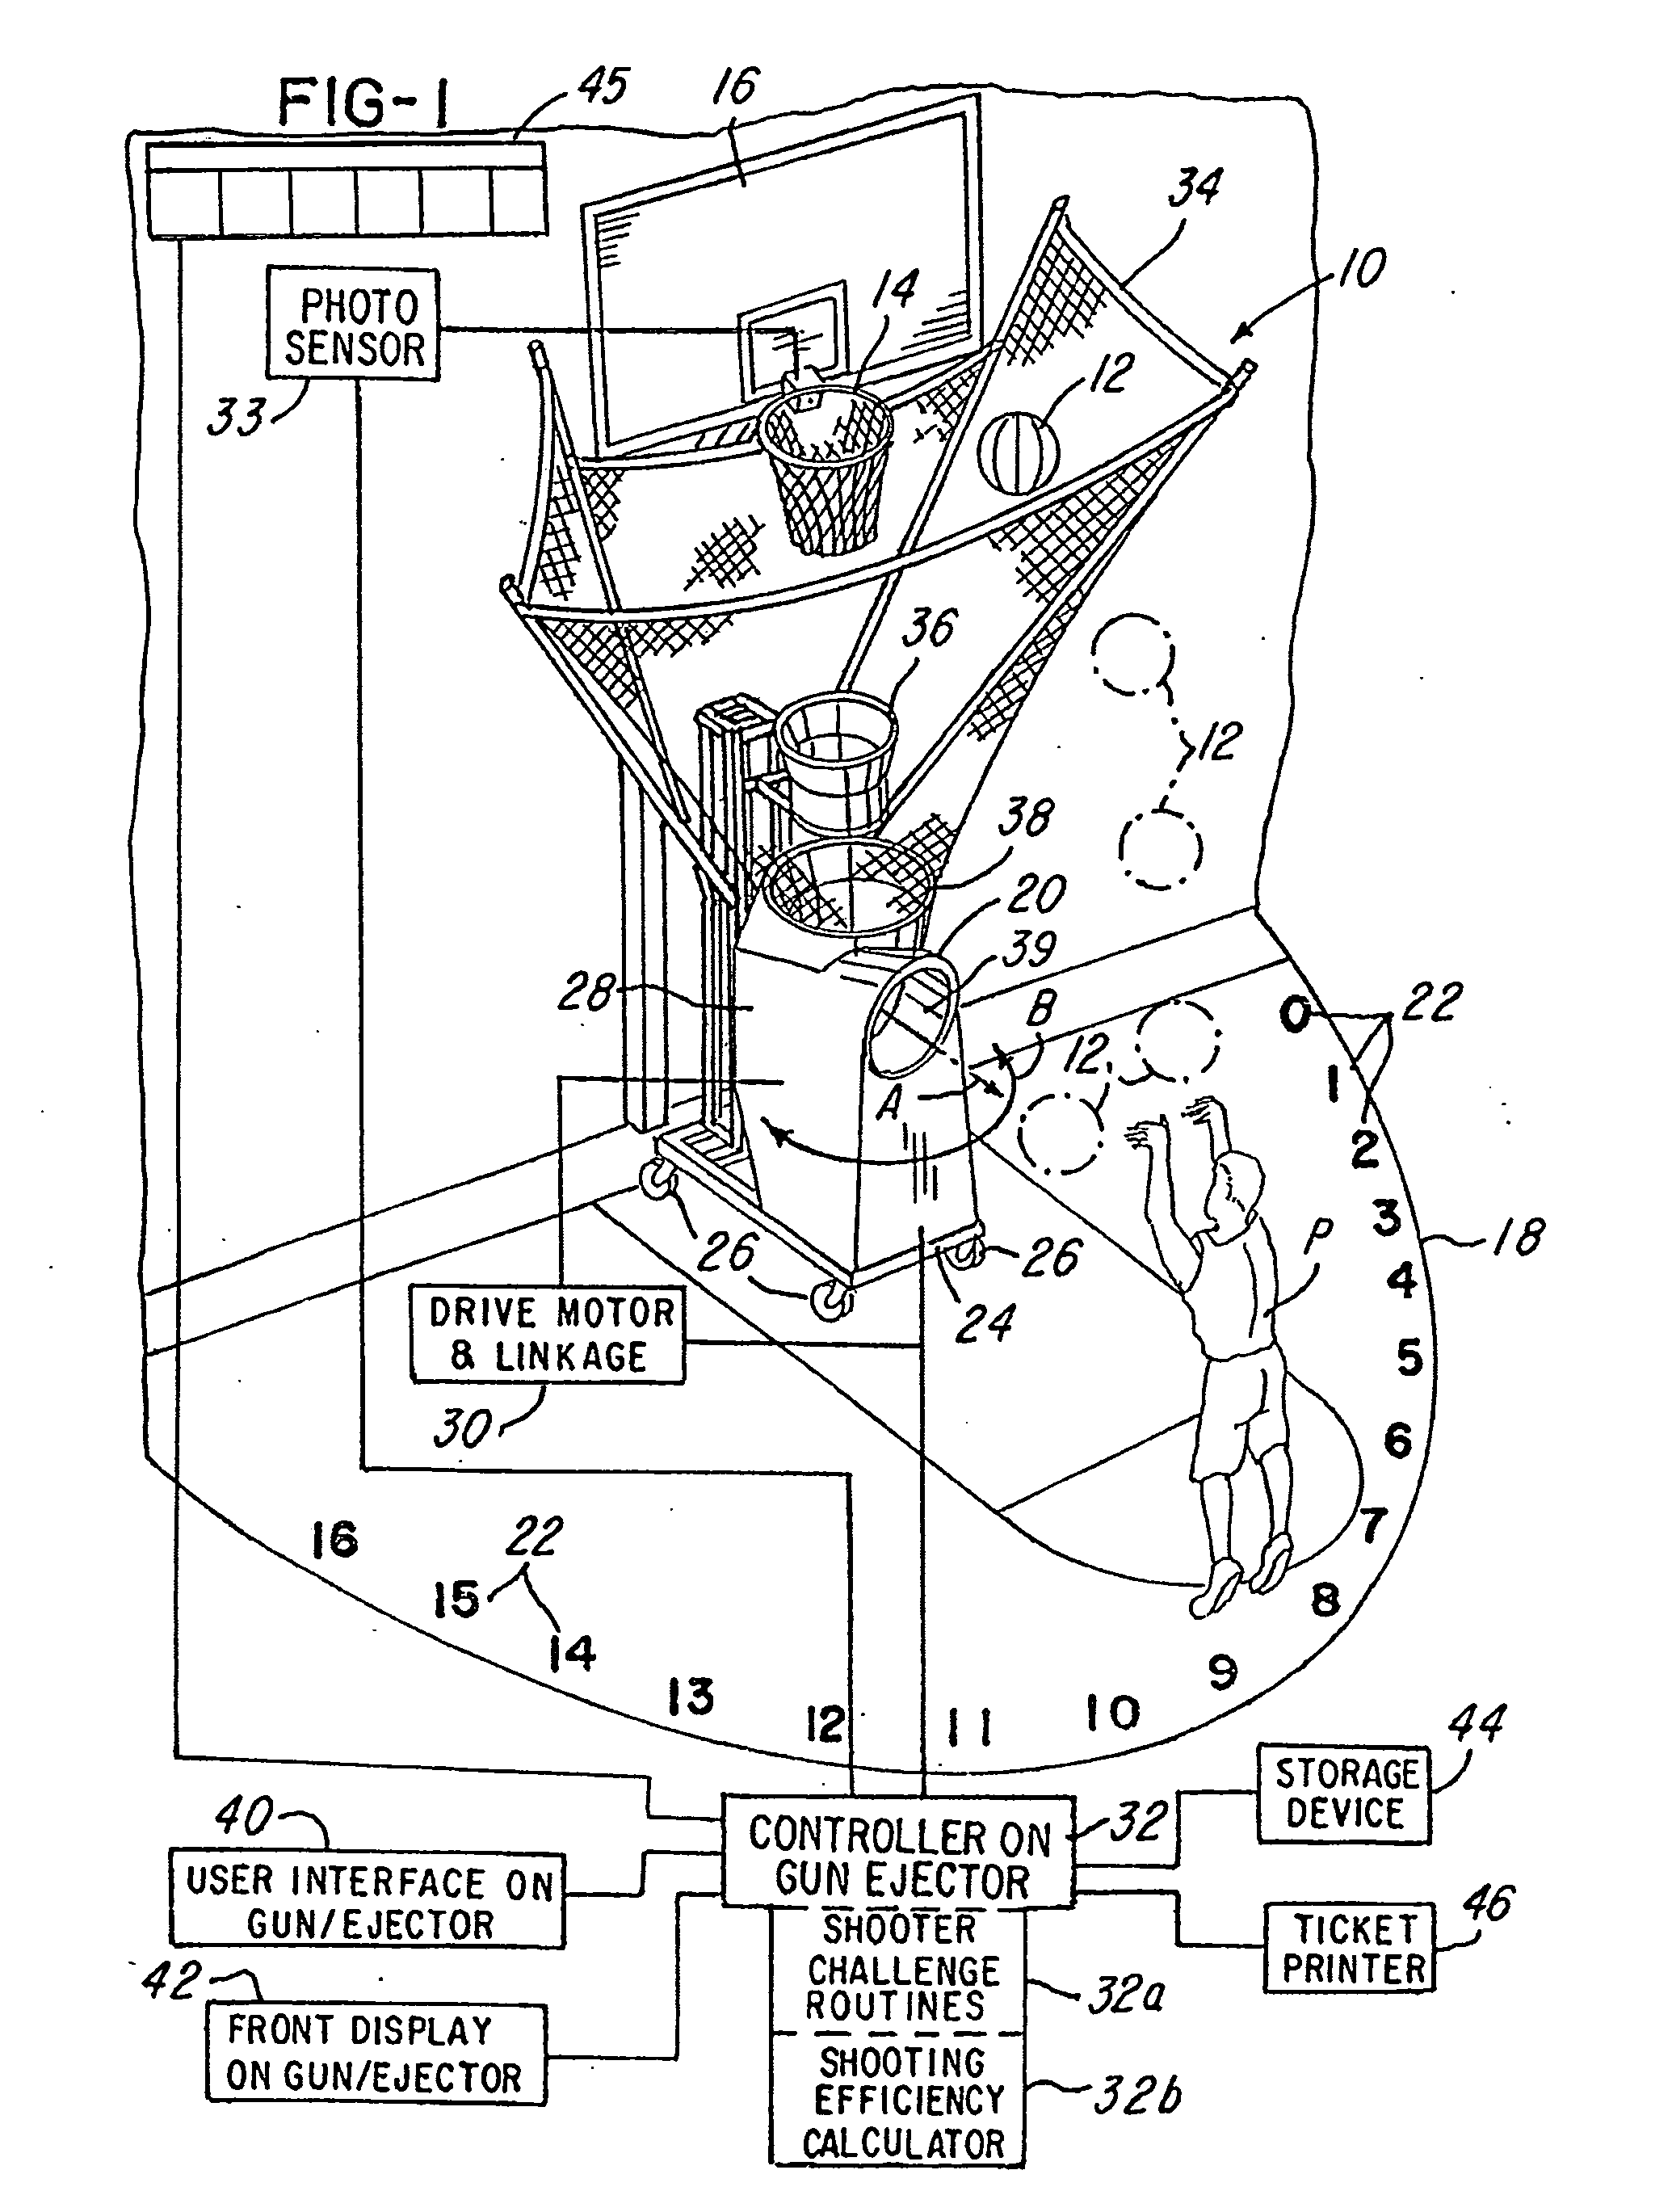 System and method for improving a basketball player's shooting including a detection and measurement system